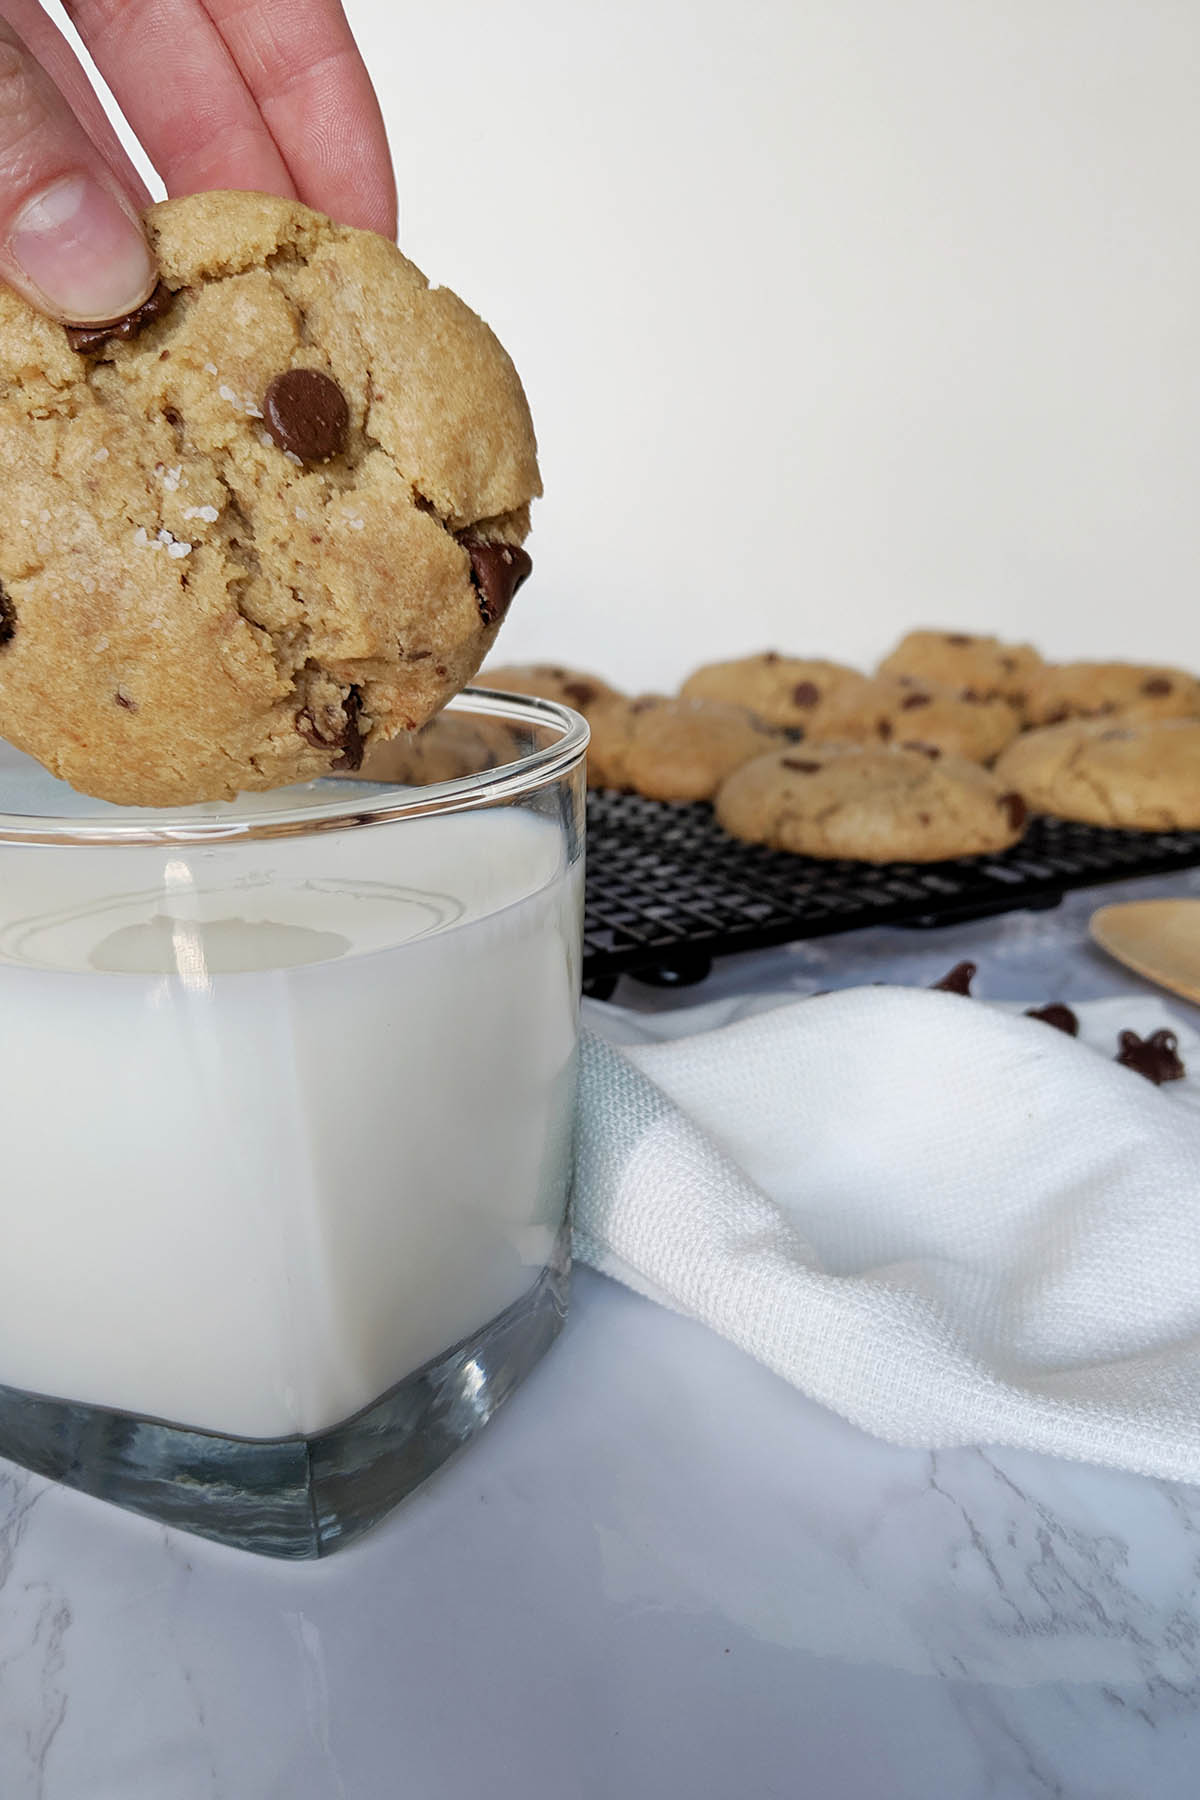 dunking chocolate chip cookie into a glass of milk.